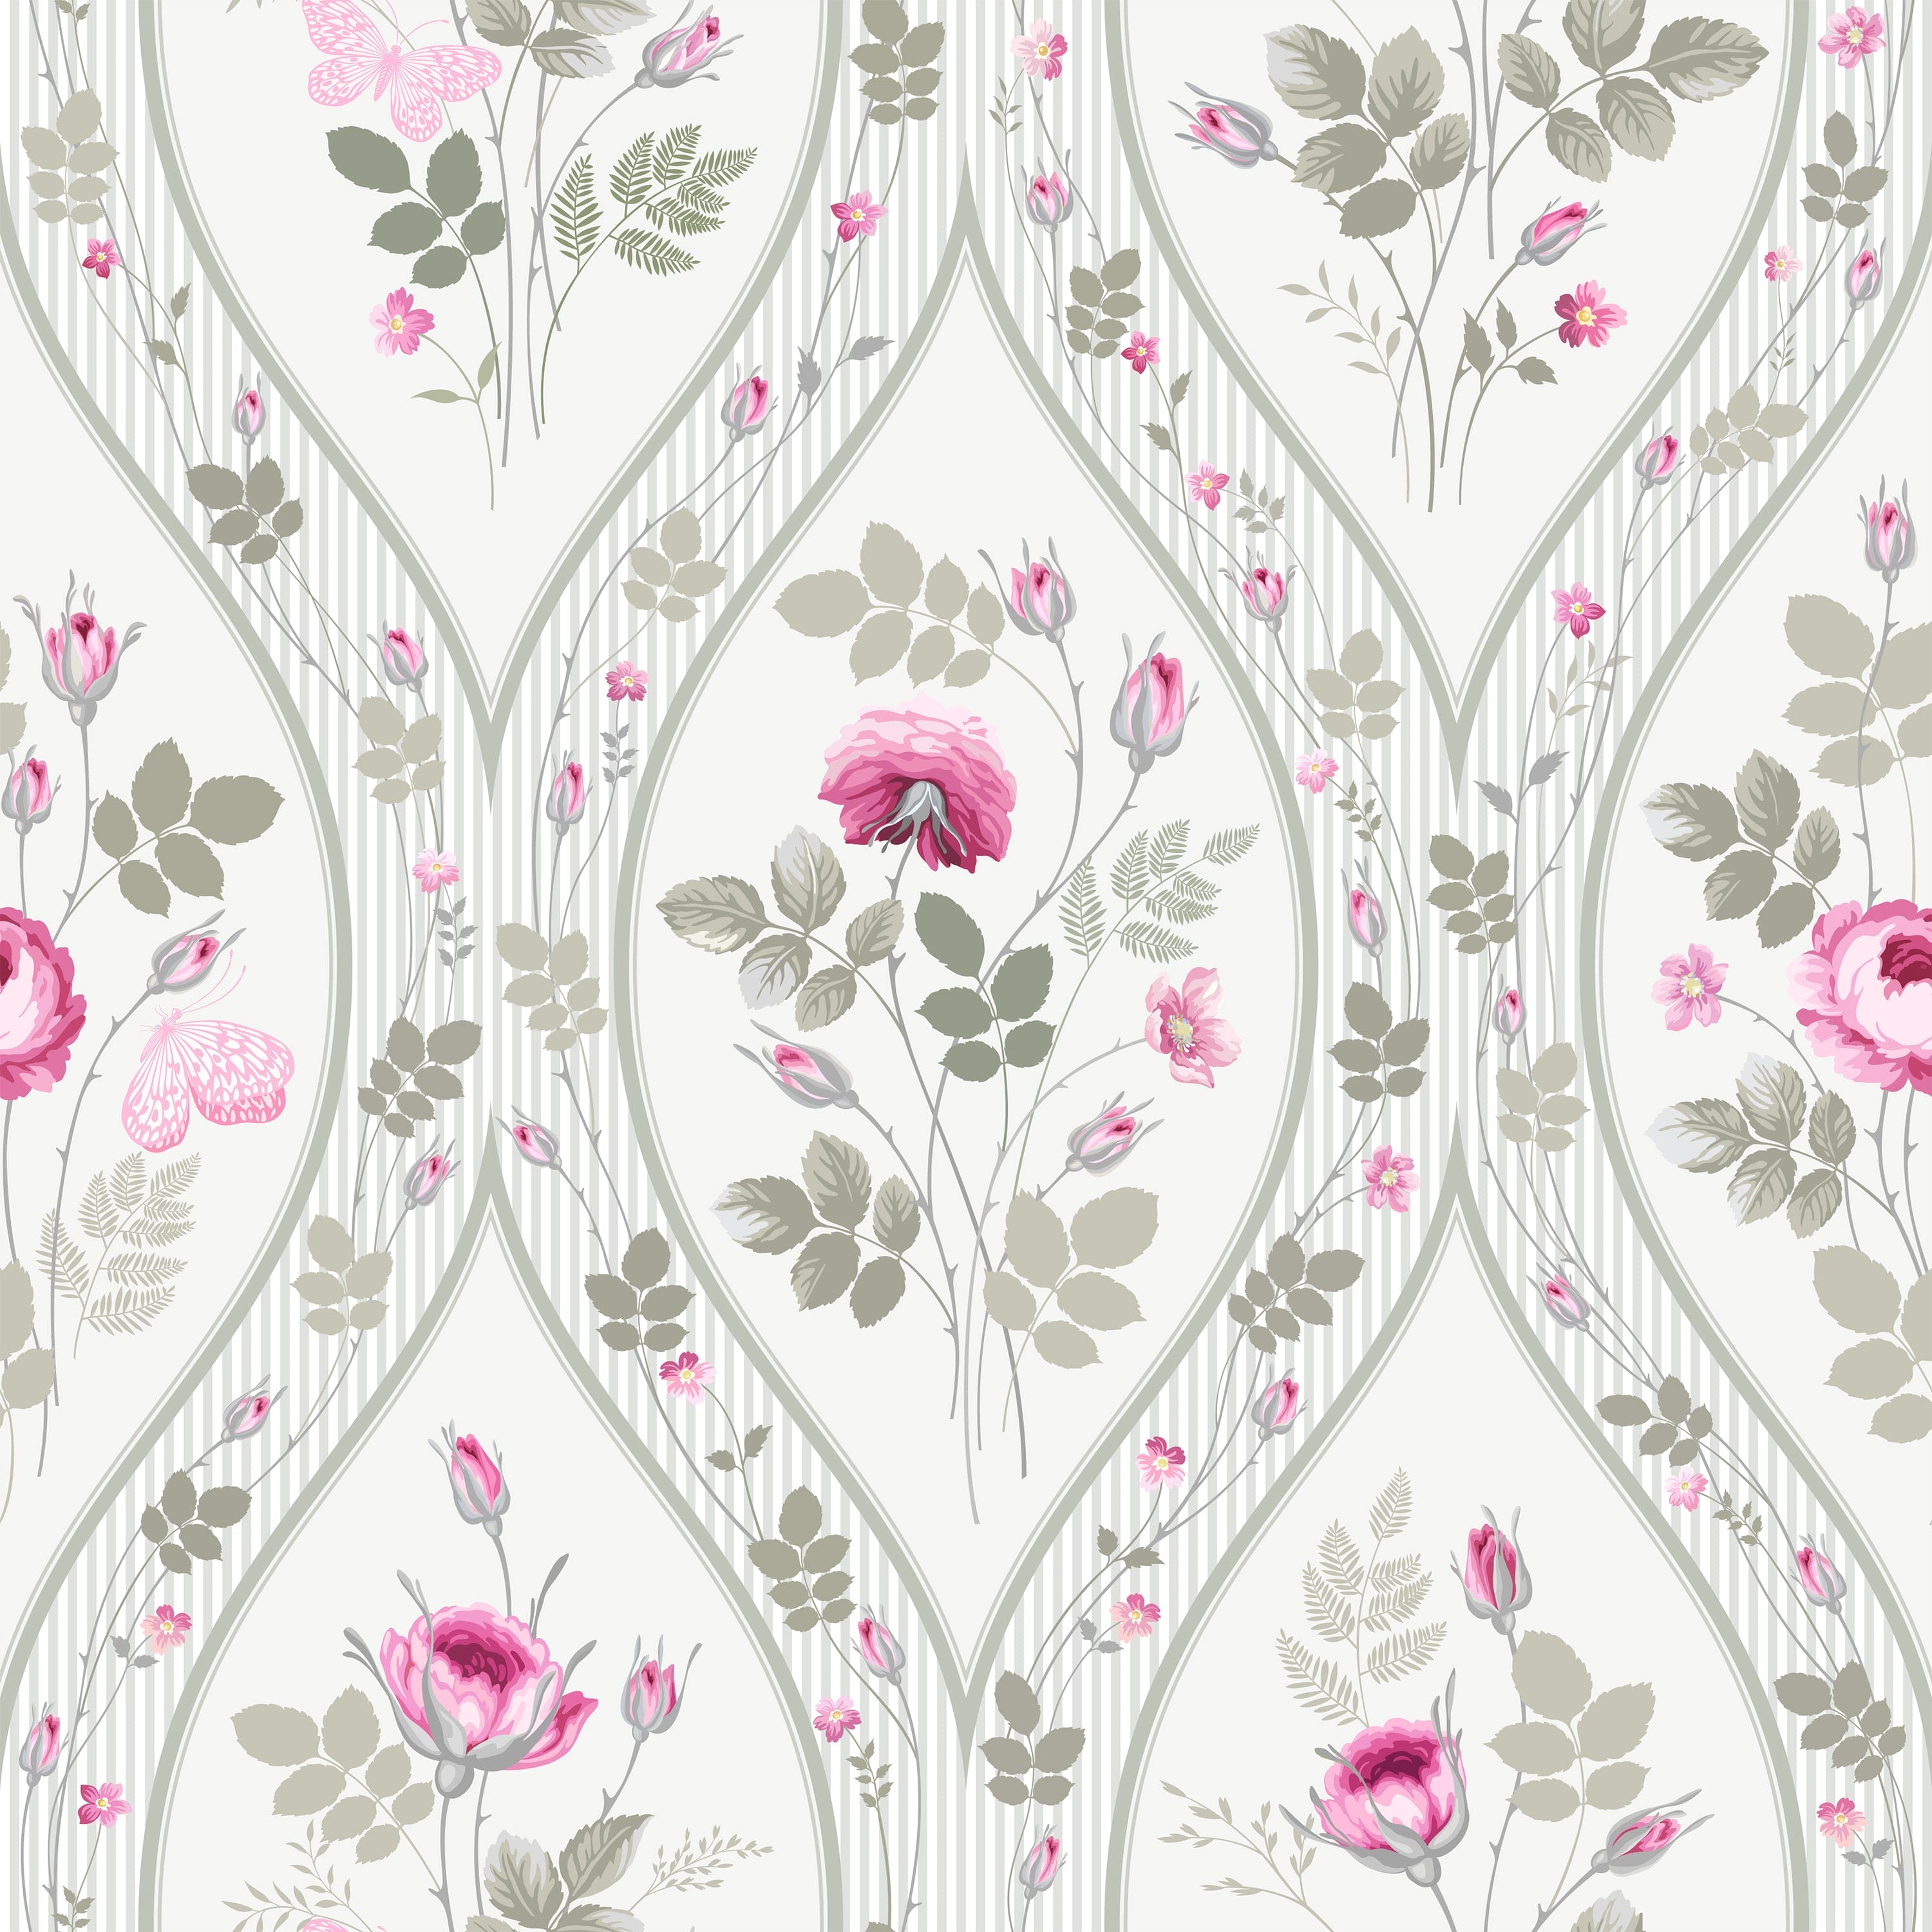 A delicate and elegant wallpaper design featuring intertwining branches and leaves with pink and white roses, set against a soft gray background. This sophisticated pattern has a graceful, vintage charm ideal for creating a serene and inviting atmosphere in any room.